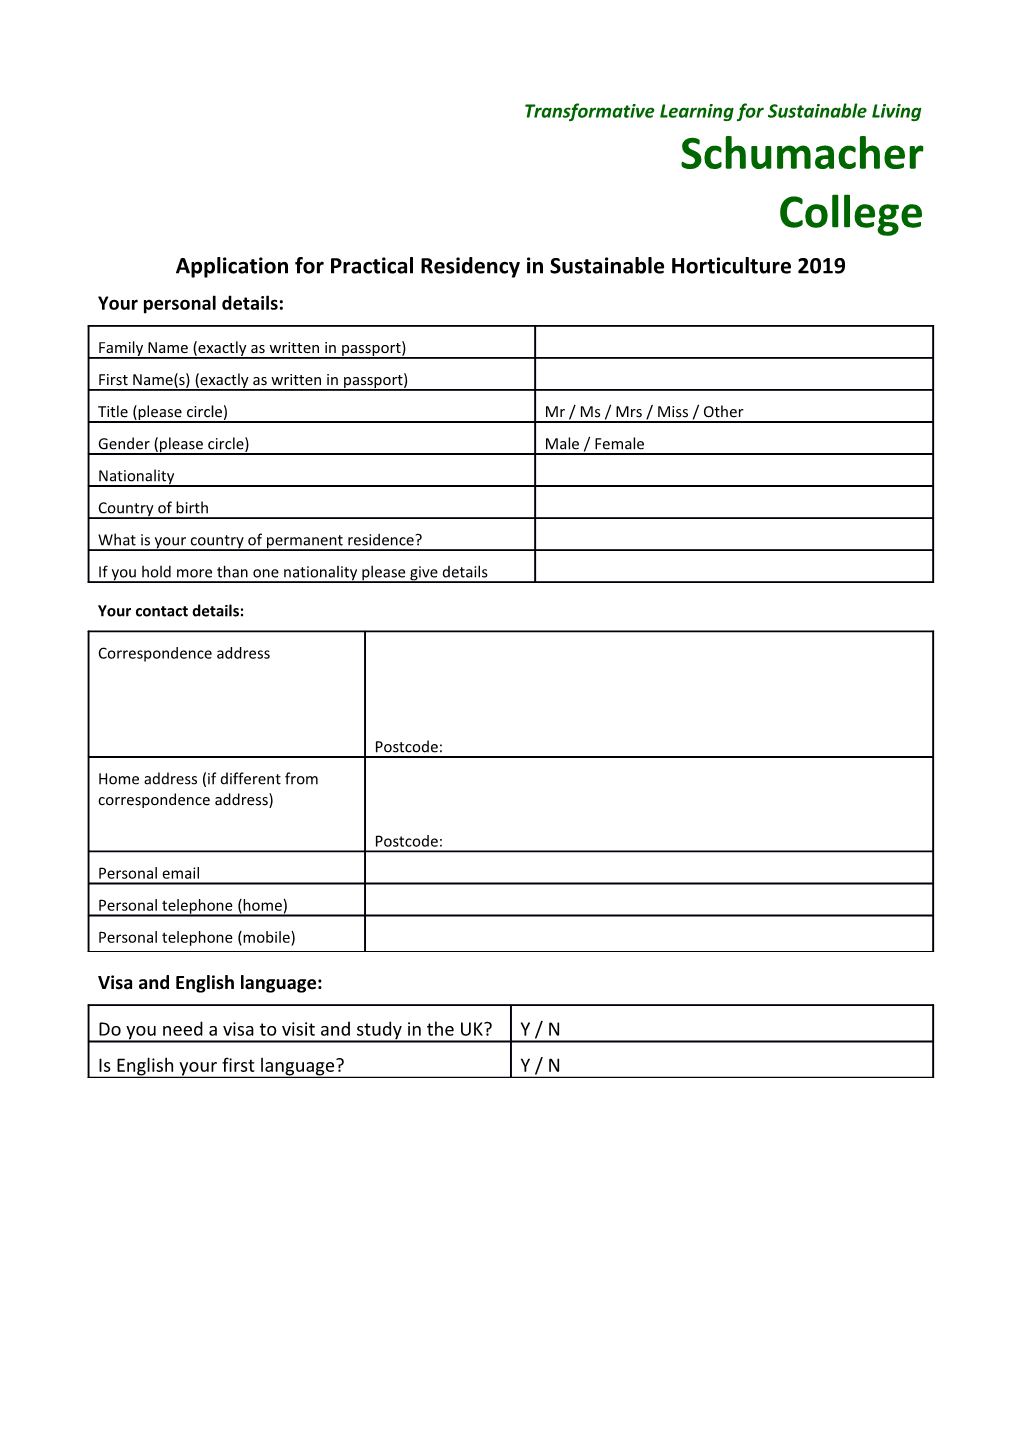 Application for Practical Residency in Sustainable Horticulture 2019